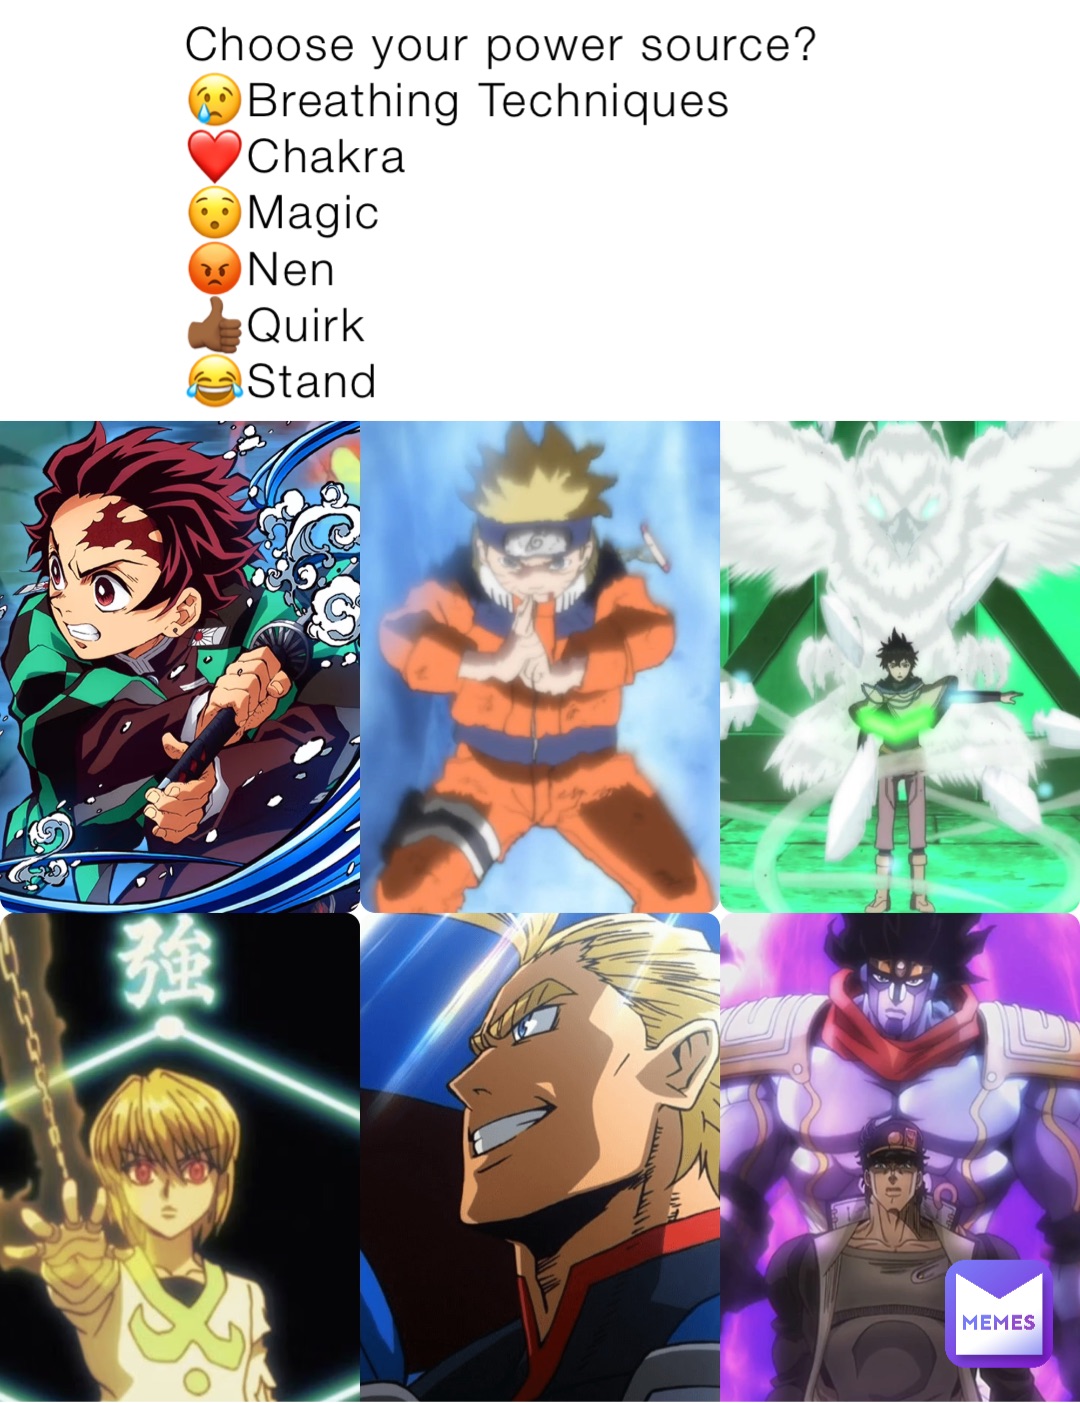 Choose your power source?
😢Breathing Techniques
❤️Chakra
😯Magic 
😡Nen
👍🏾Quirk
😂Stand